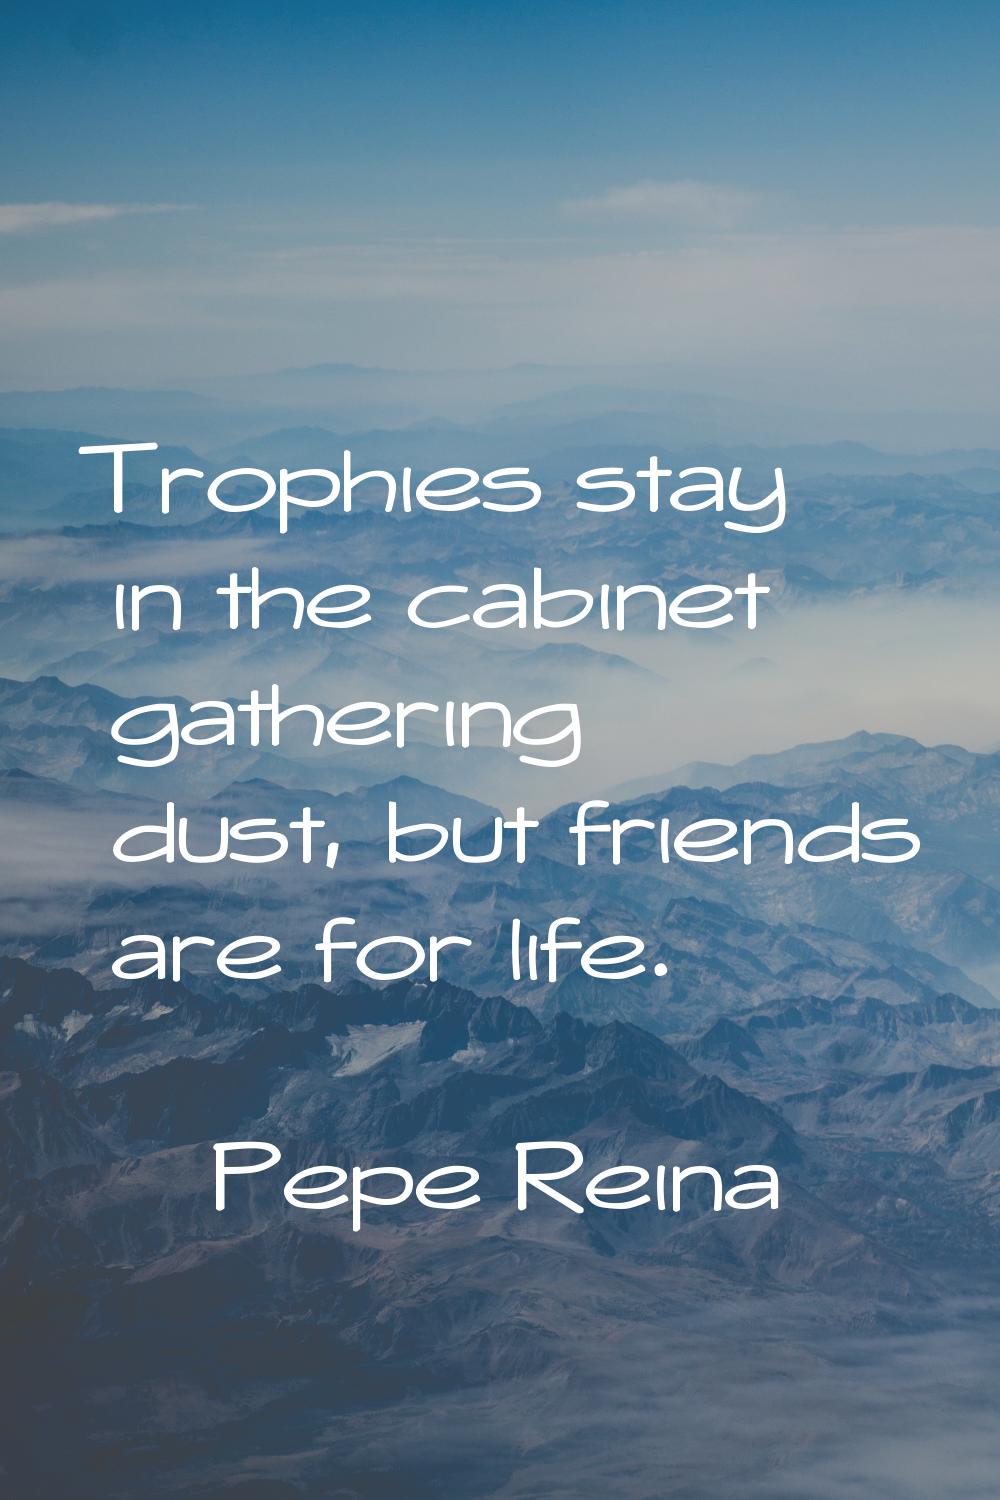 Trophies stay in the cabinet gathering dust, but friends are for life.